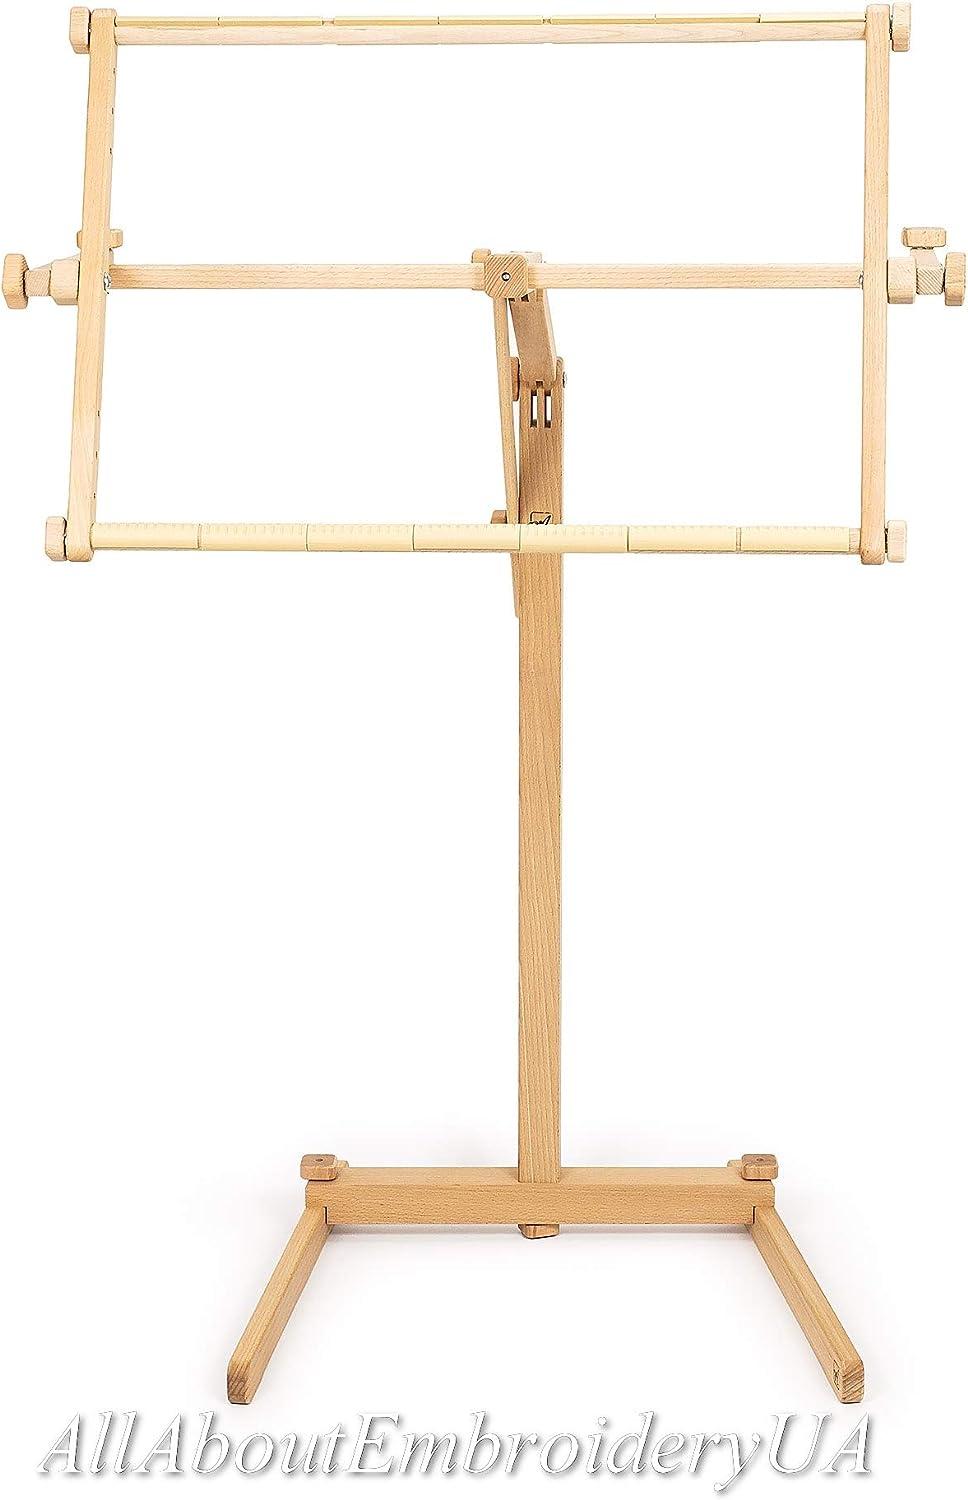 Needlework Floor-standing Type Stand With Adjustable Frame Made of Organic  Beech Wood Tapestry Cross Stitch Embroidery Frame Holder 